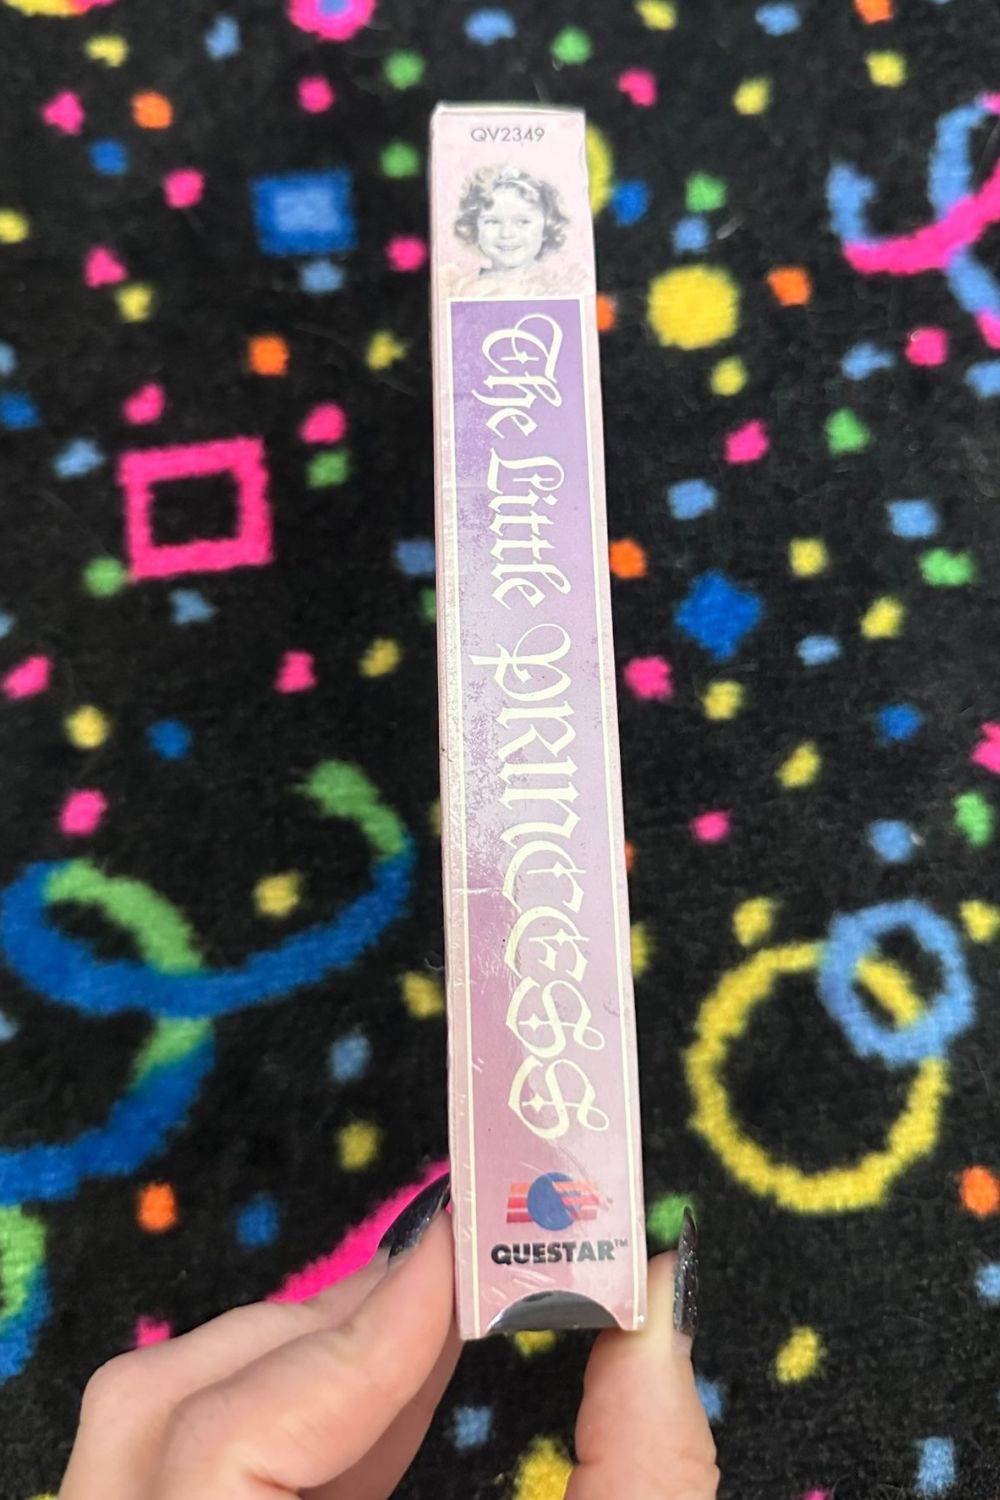 THE LITTLE PRINCESS VHS IN COLOR (SEALED)*